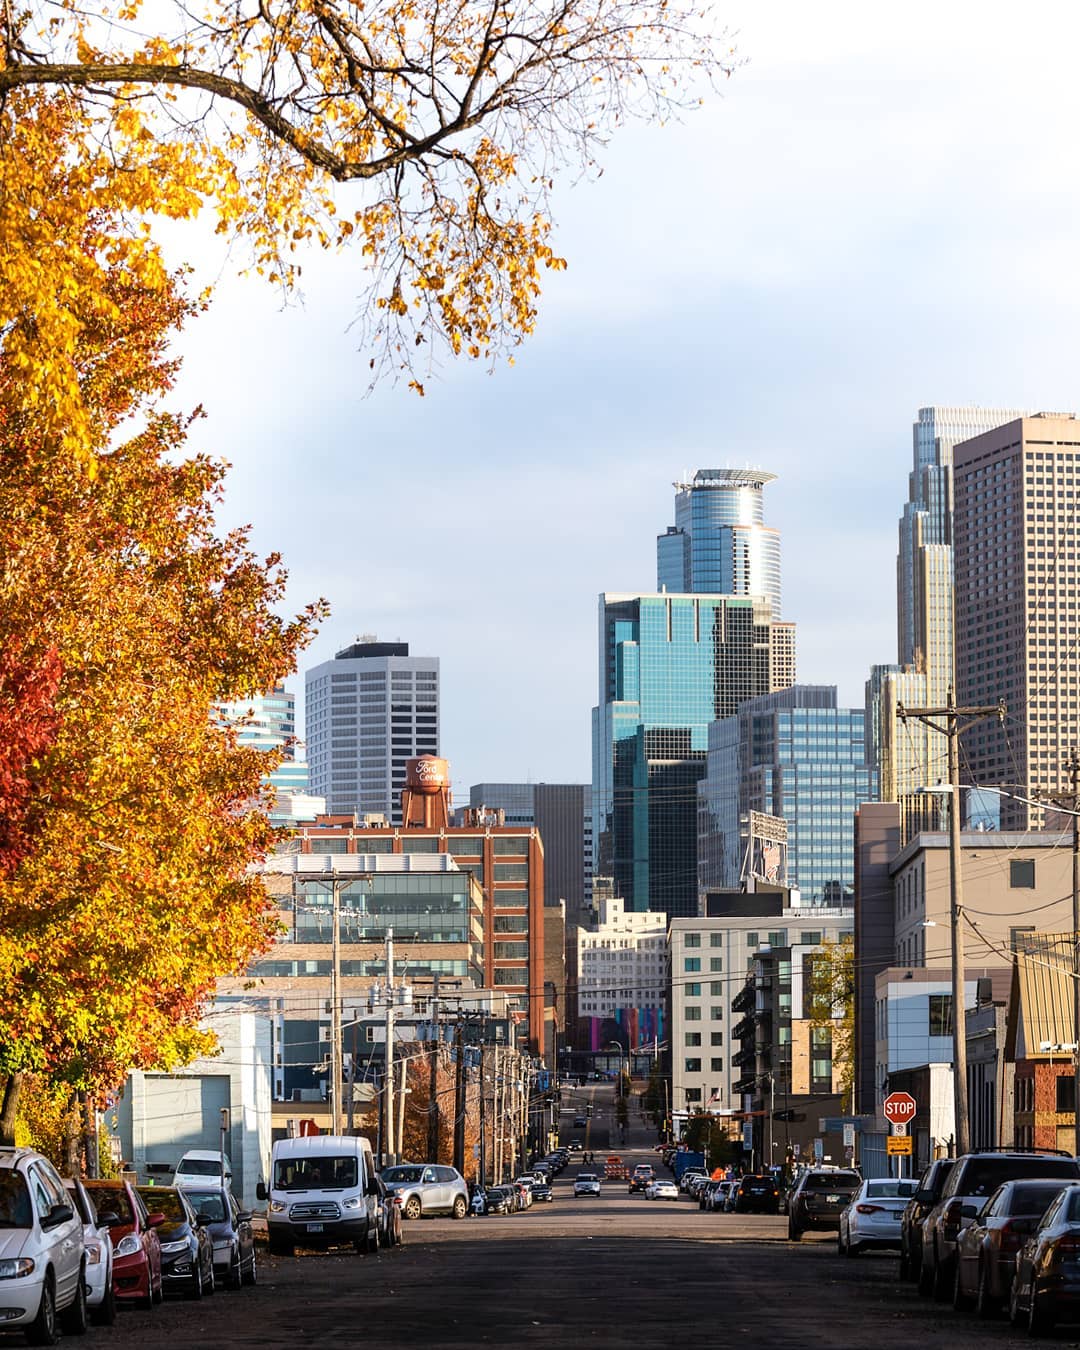 View of Minneapolis Skyline from a Main Street. Photo by Instagram user @andrewpetercanton